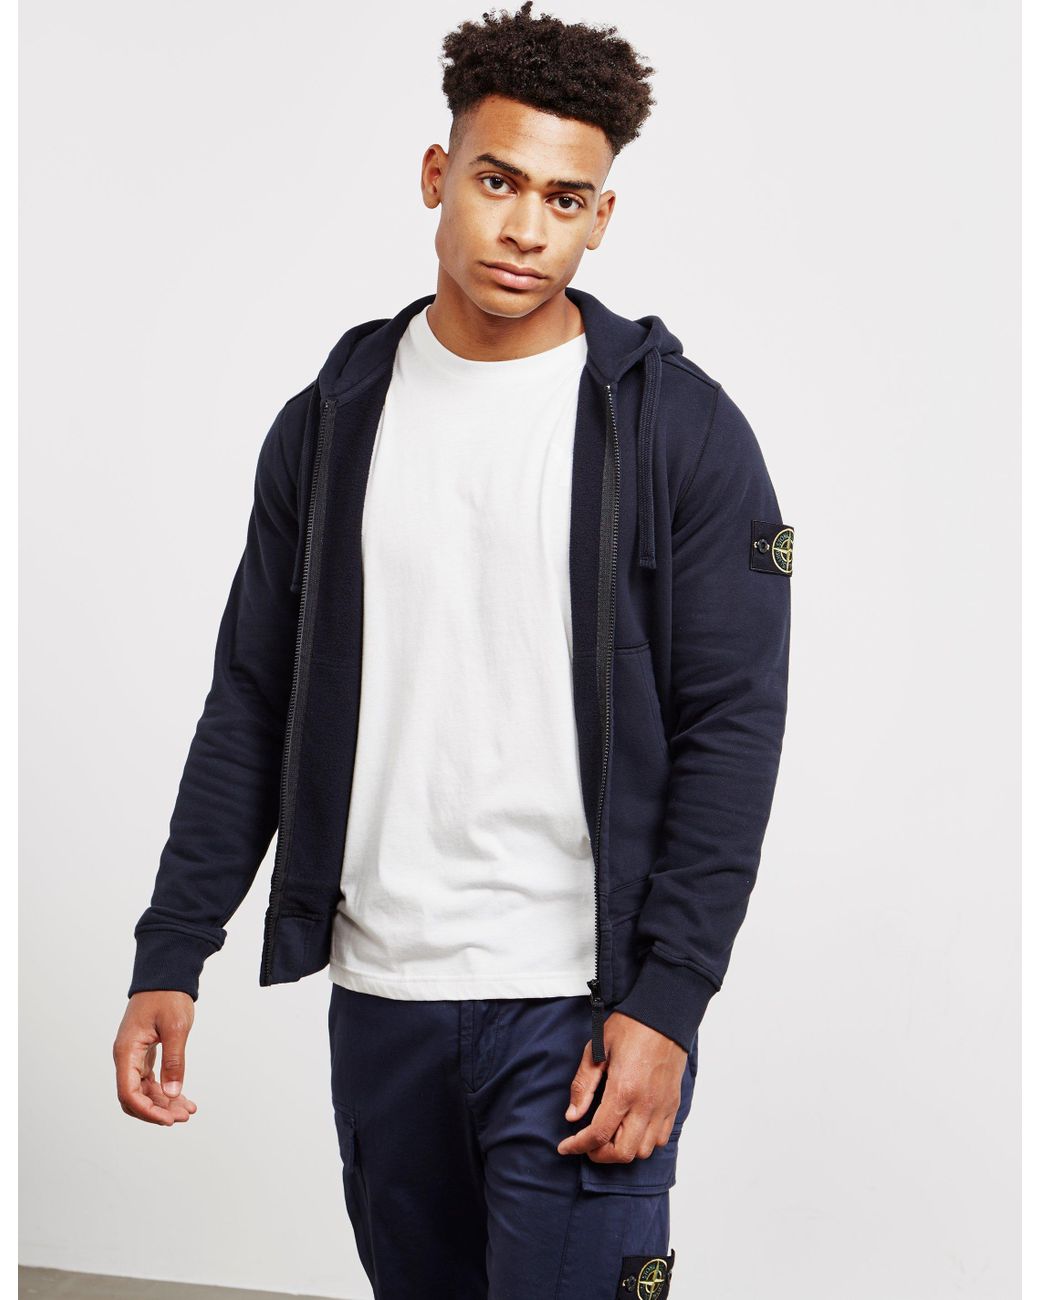 gym and workout clothes Blue gym and workout clothes Stone Island Activewear Stone Island Cotton 40th Anniversary Sweatshirt in Navy for Men Mens Activewear 